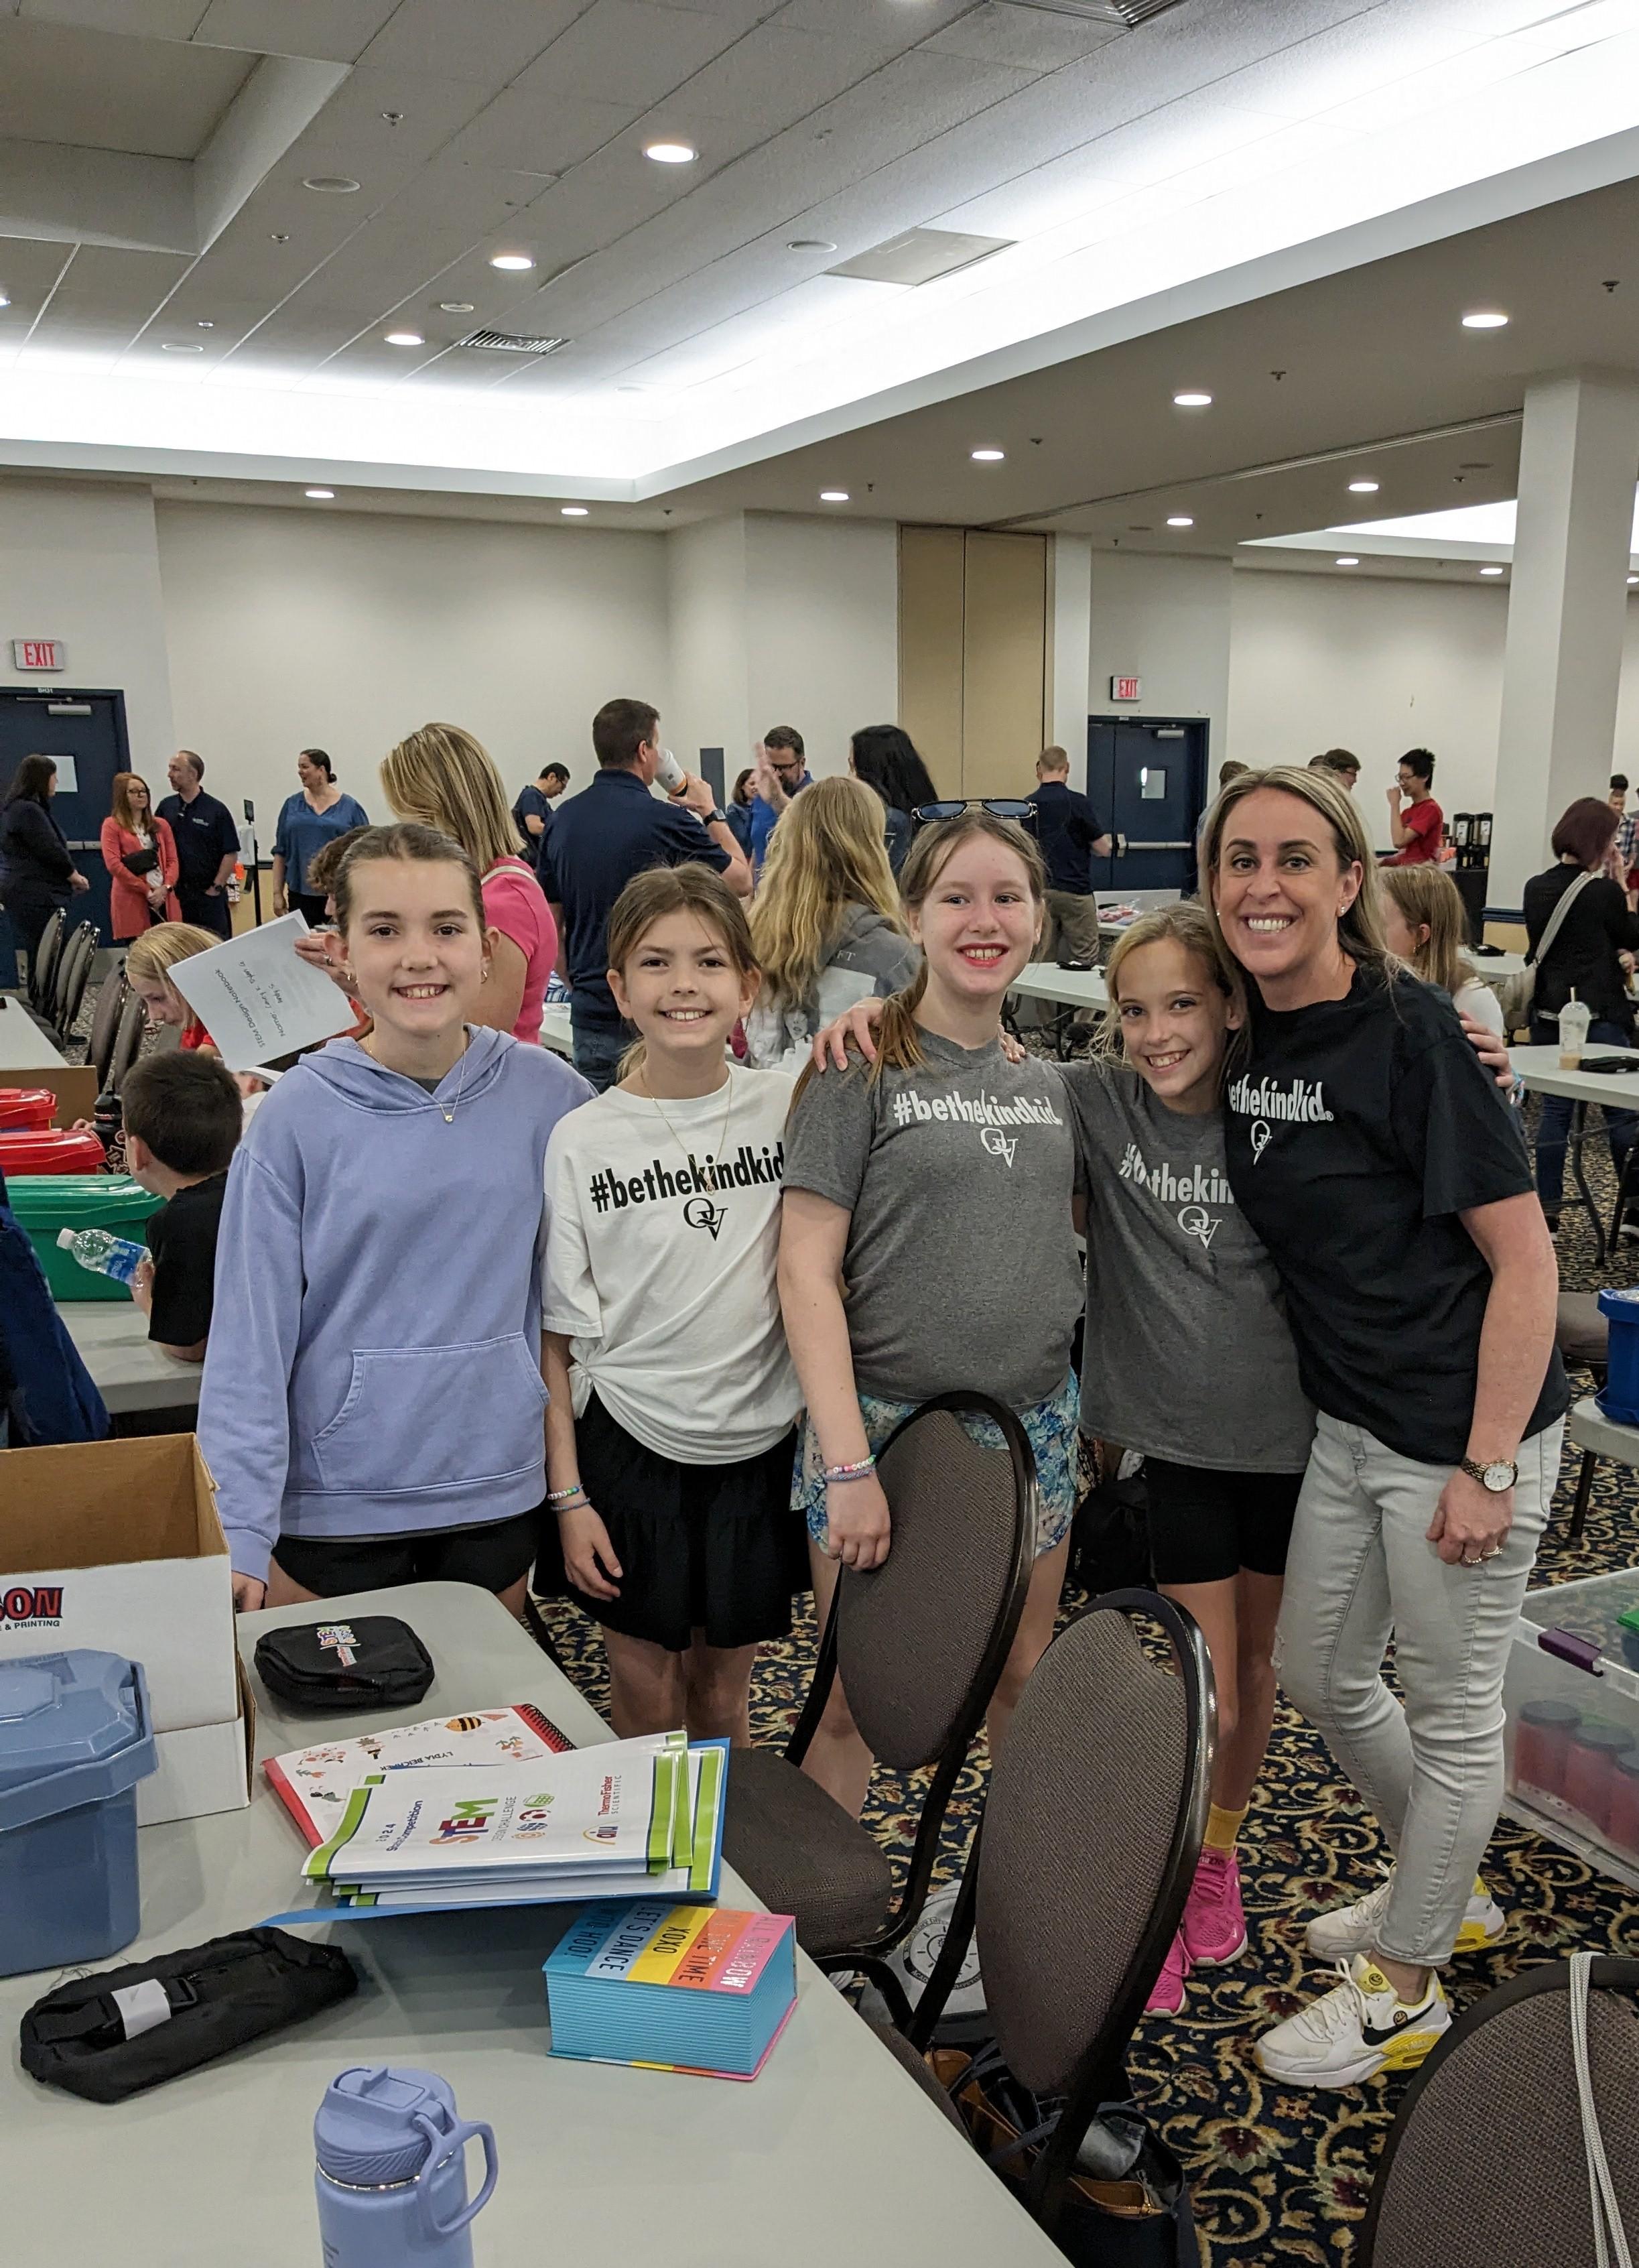 Image depicts members of the STEM Design team from Edgeworth Elementary posing with their coach, Mrs. Sara Schoener.